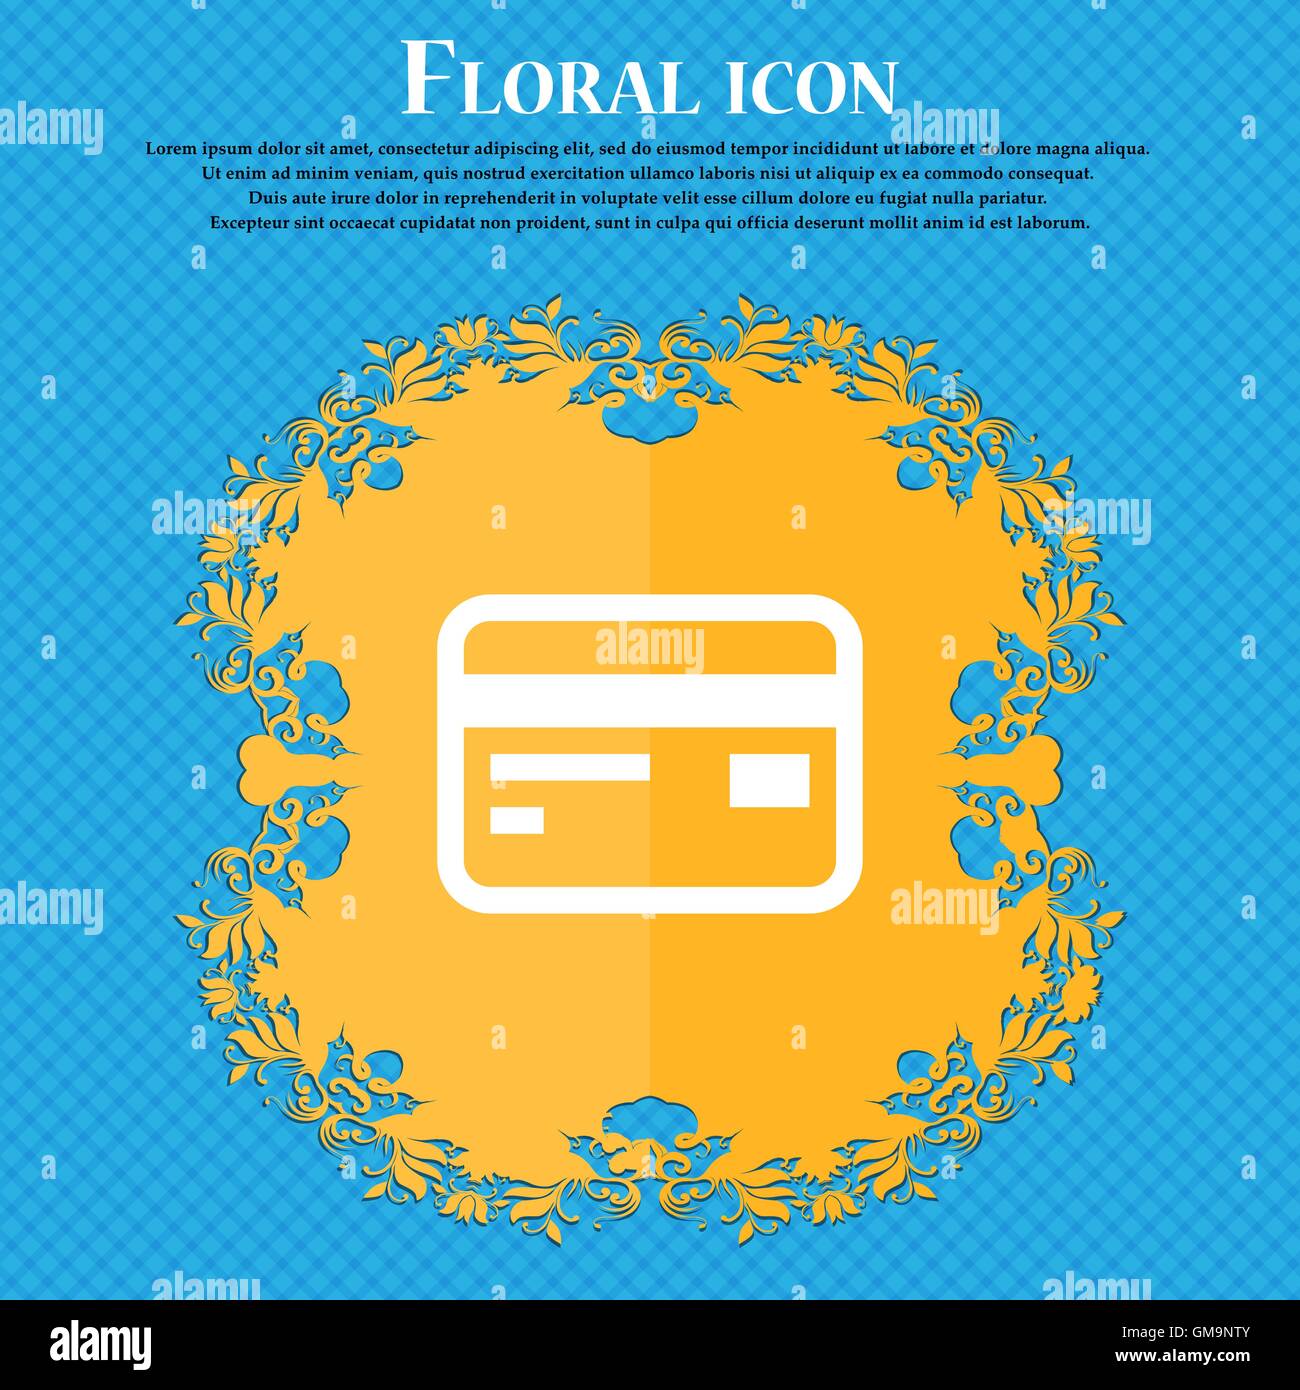 Credit, debit card . Floral flat design on a blue abstract background with place for your text. Vector Stock Vector